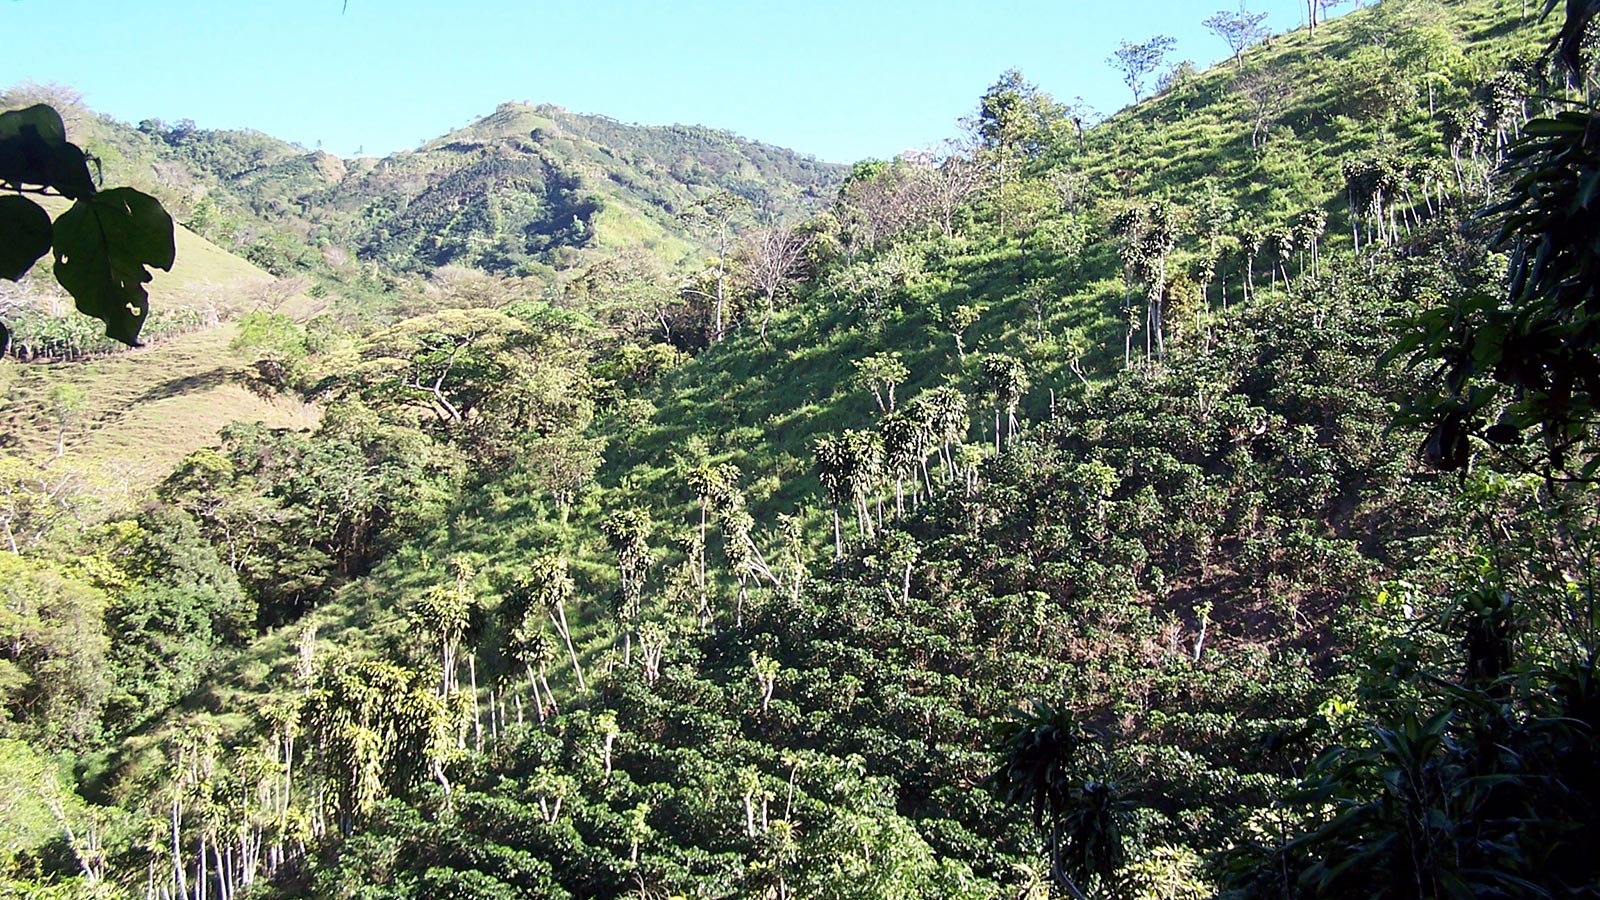 hectares,property,specialty, coffee plantation,plants,lots,located,mountains